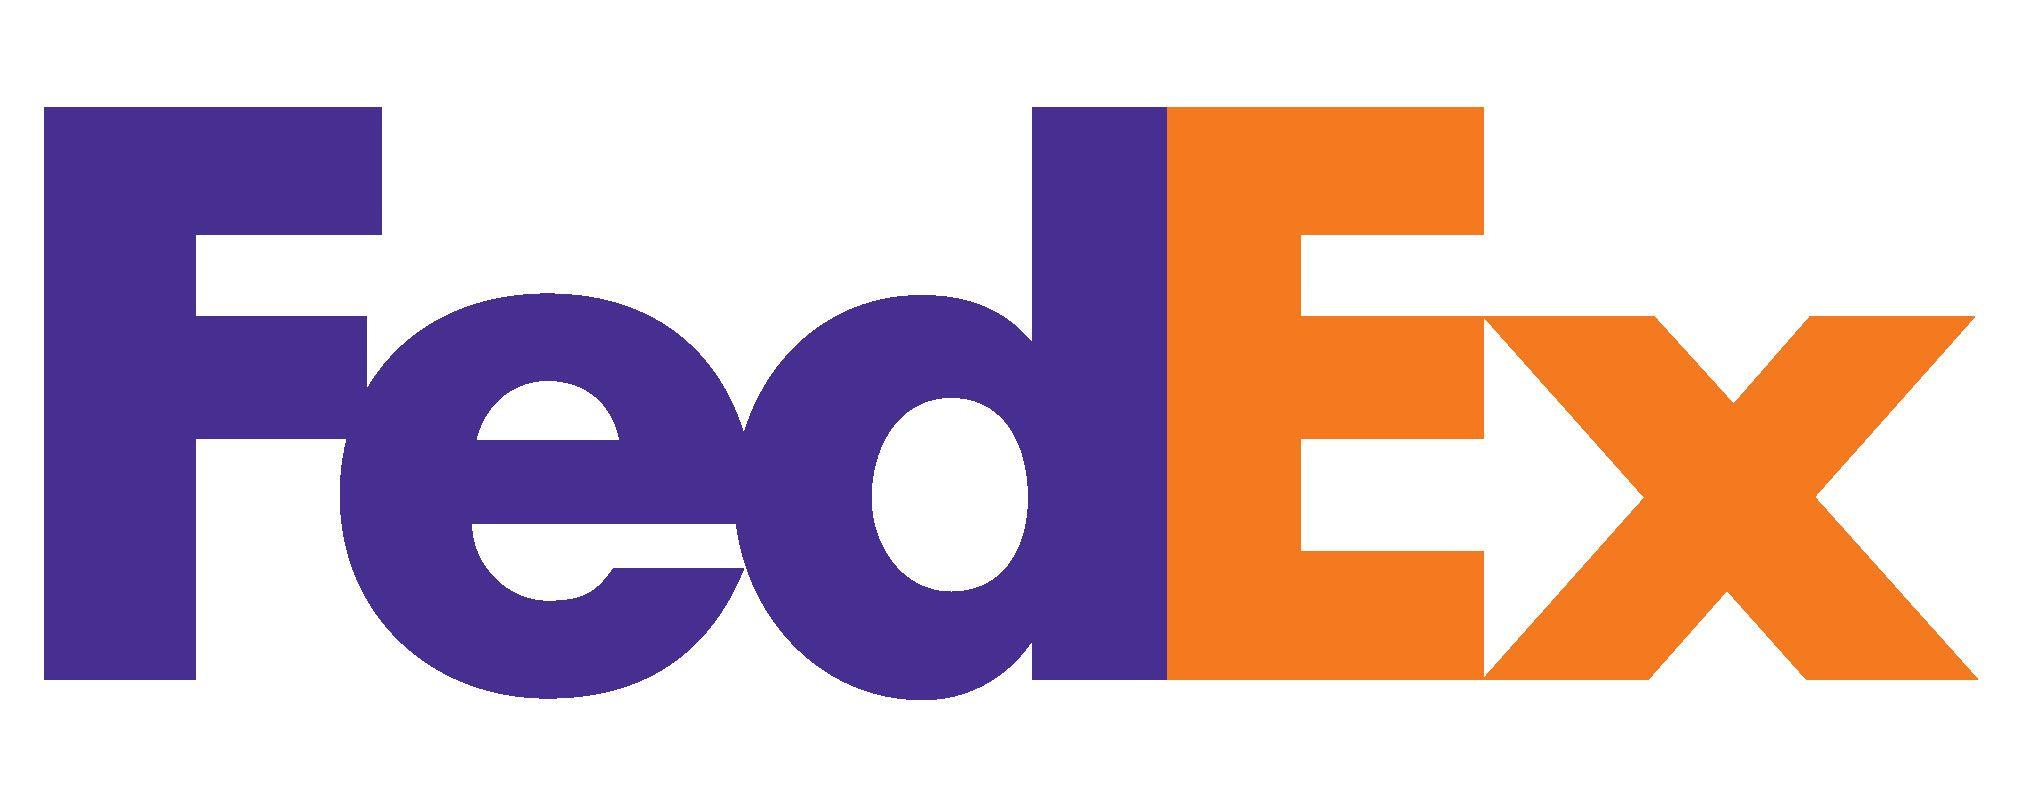 FedEx Corp Logo - FedEx Corp | $FDX Stock | Shares Have Wild Swing In After-Hours ...